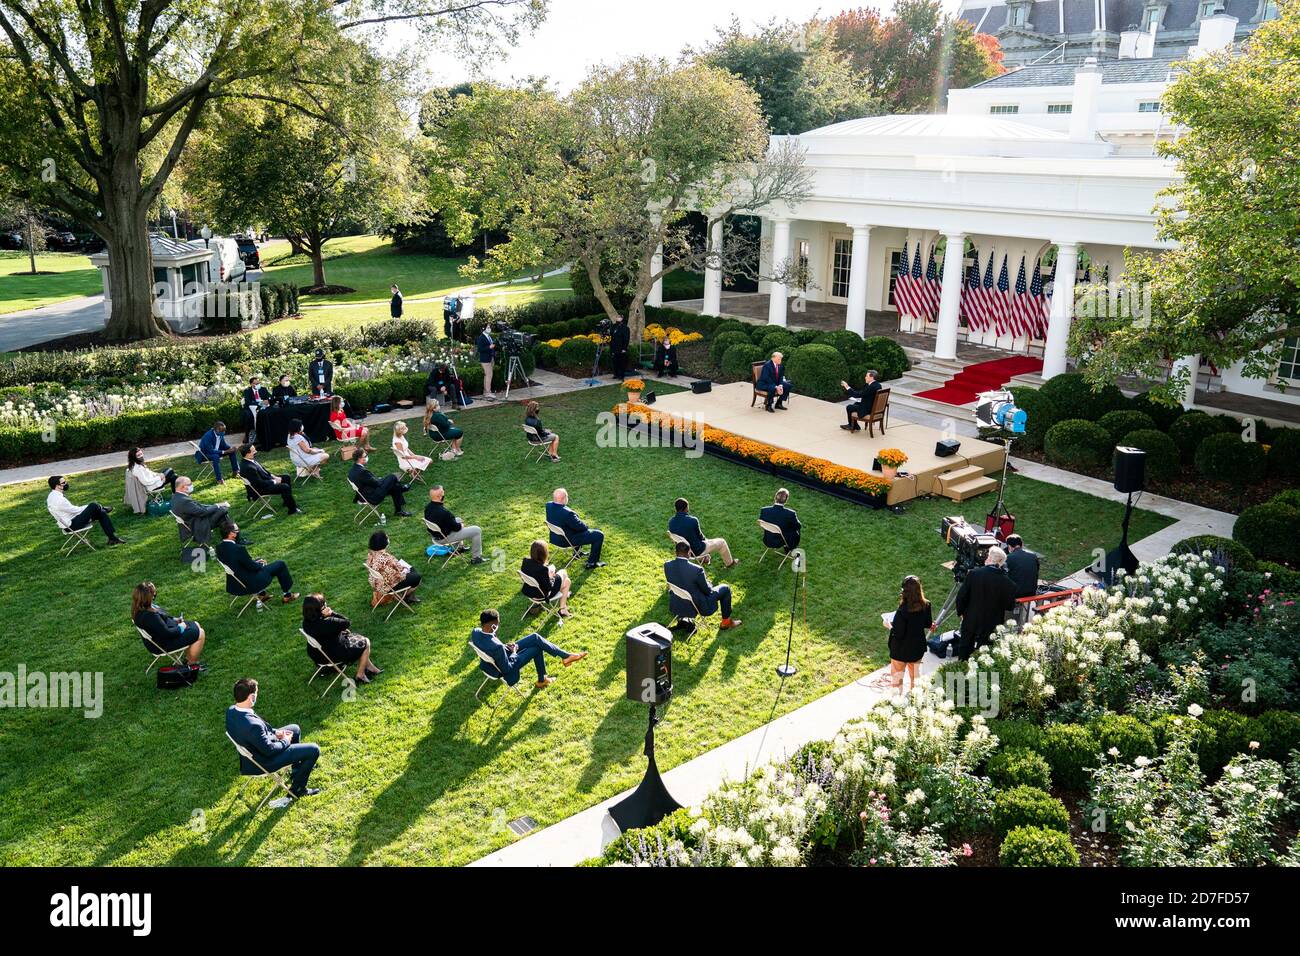 U.S. President Donald Trump, participates in a Sinclair Broadcast town hall event with host Eric Bolling in the Rose Garden of the White House October 20, 2020 in Washington, D.C. Sinclair is a conservative media outlet competing with Fox News. Stock Photo